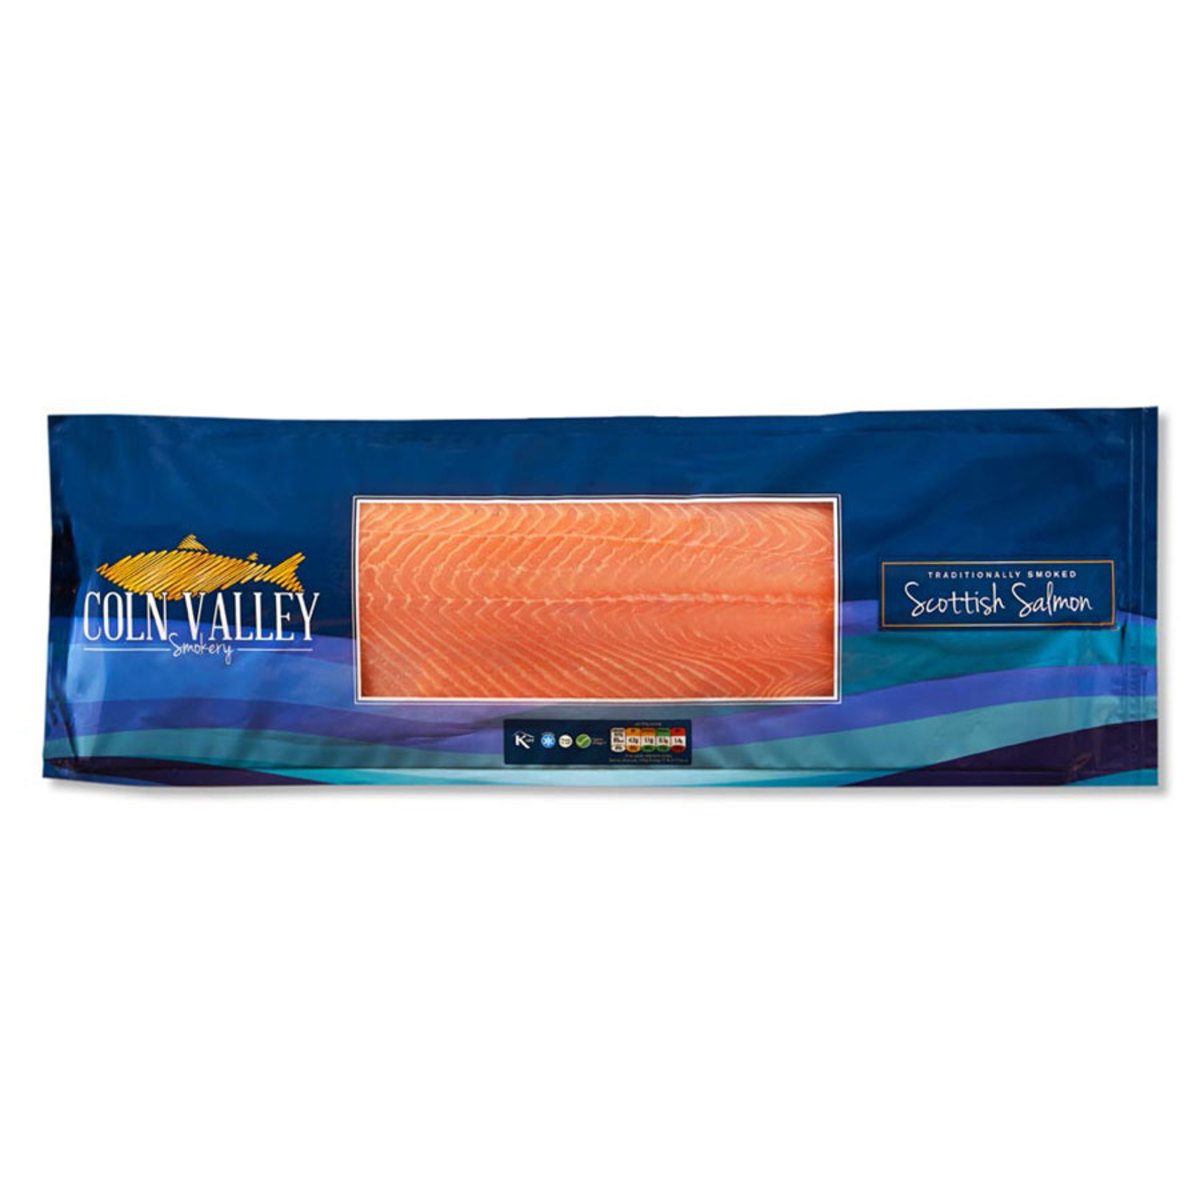 Coln Valley Smoked Scottish Salmon, 1kg Banquet Pack (Serves 10-20 people)